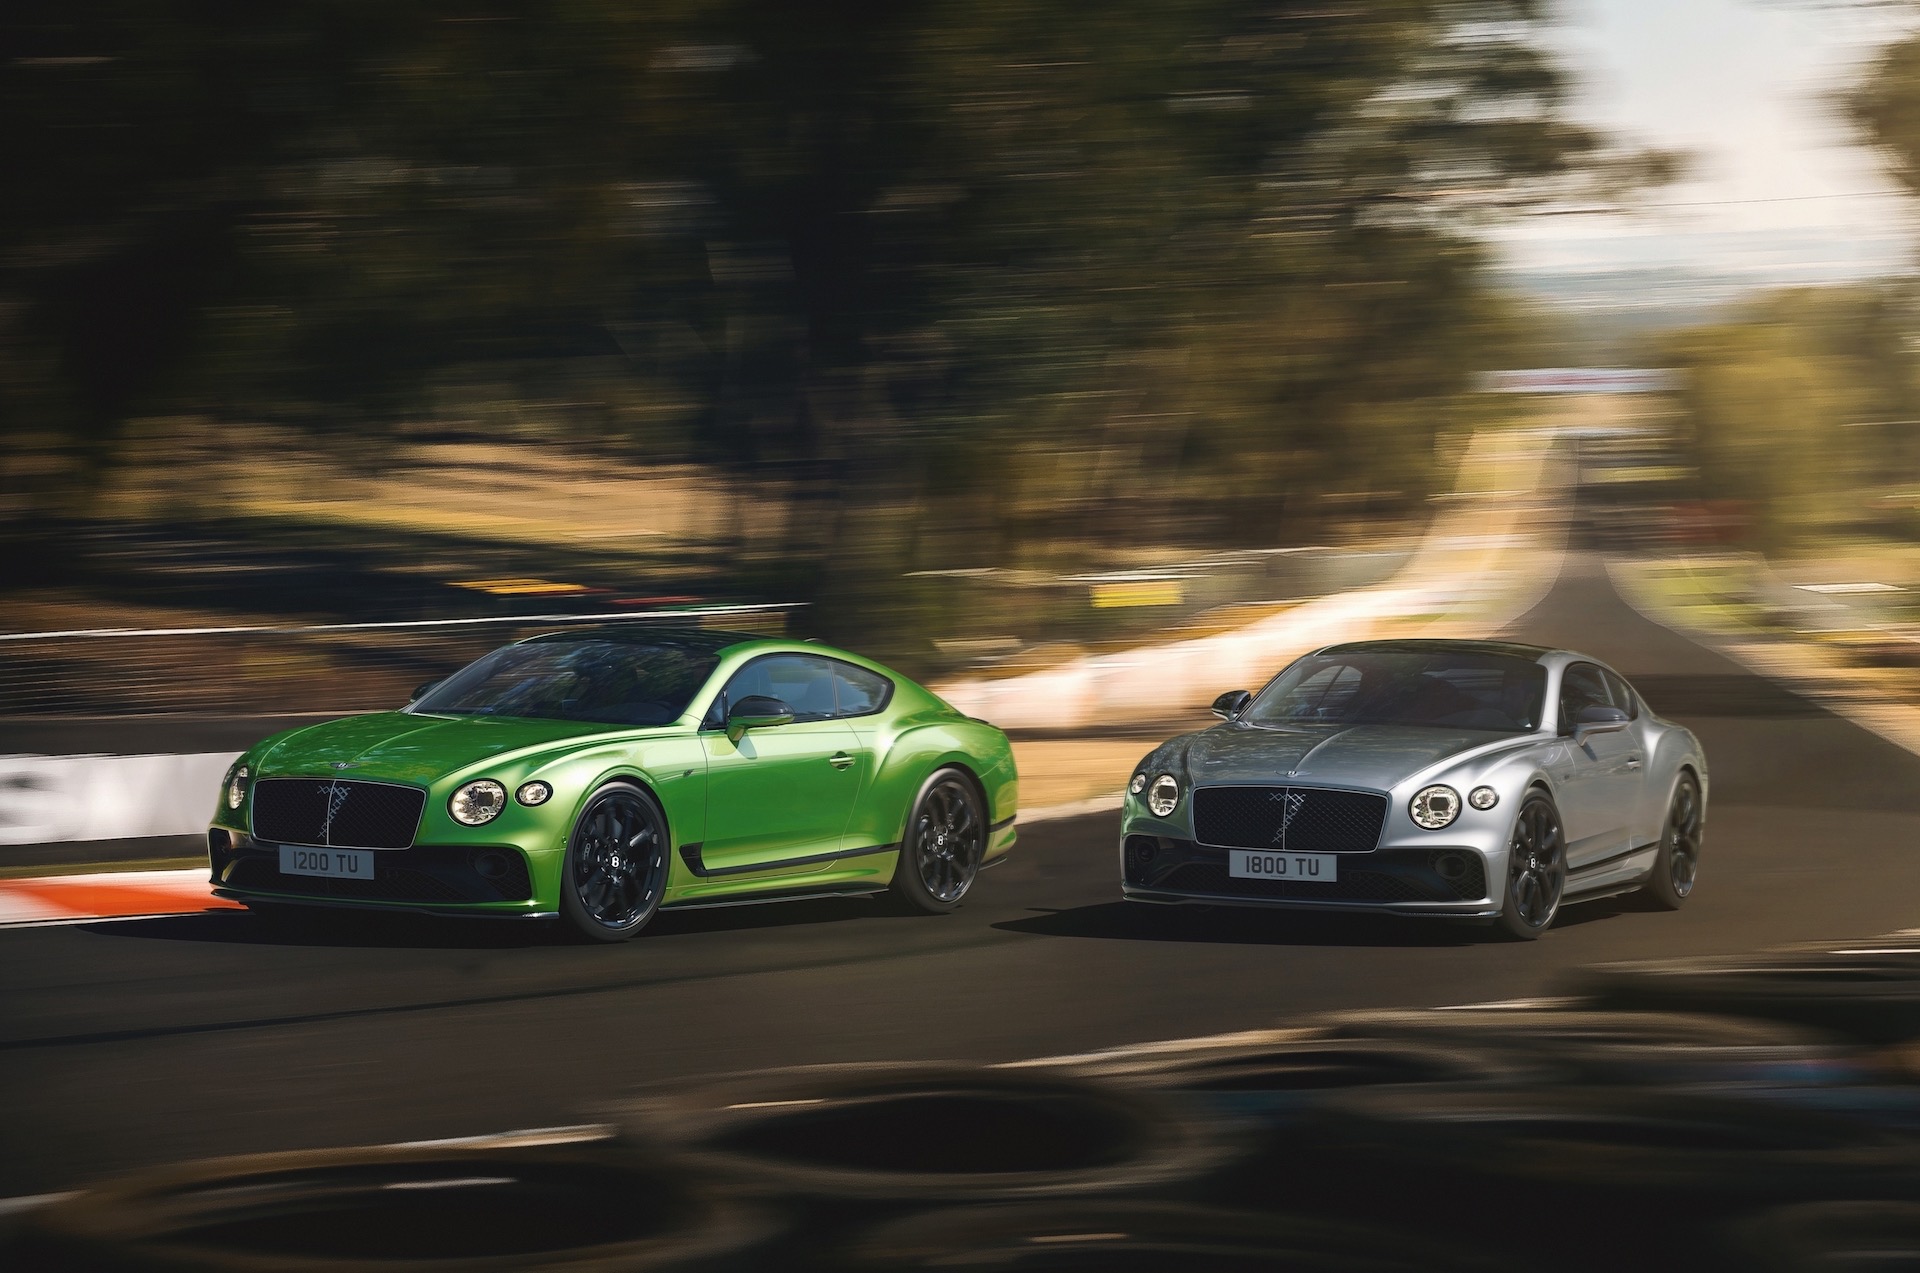 Bentley debuts Bathurst 12 Hour Continental GT S special editions